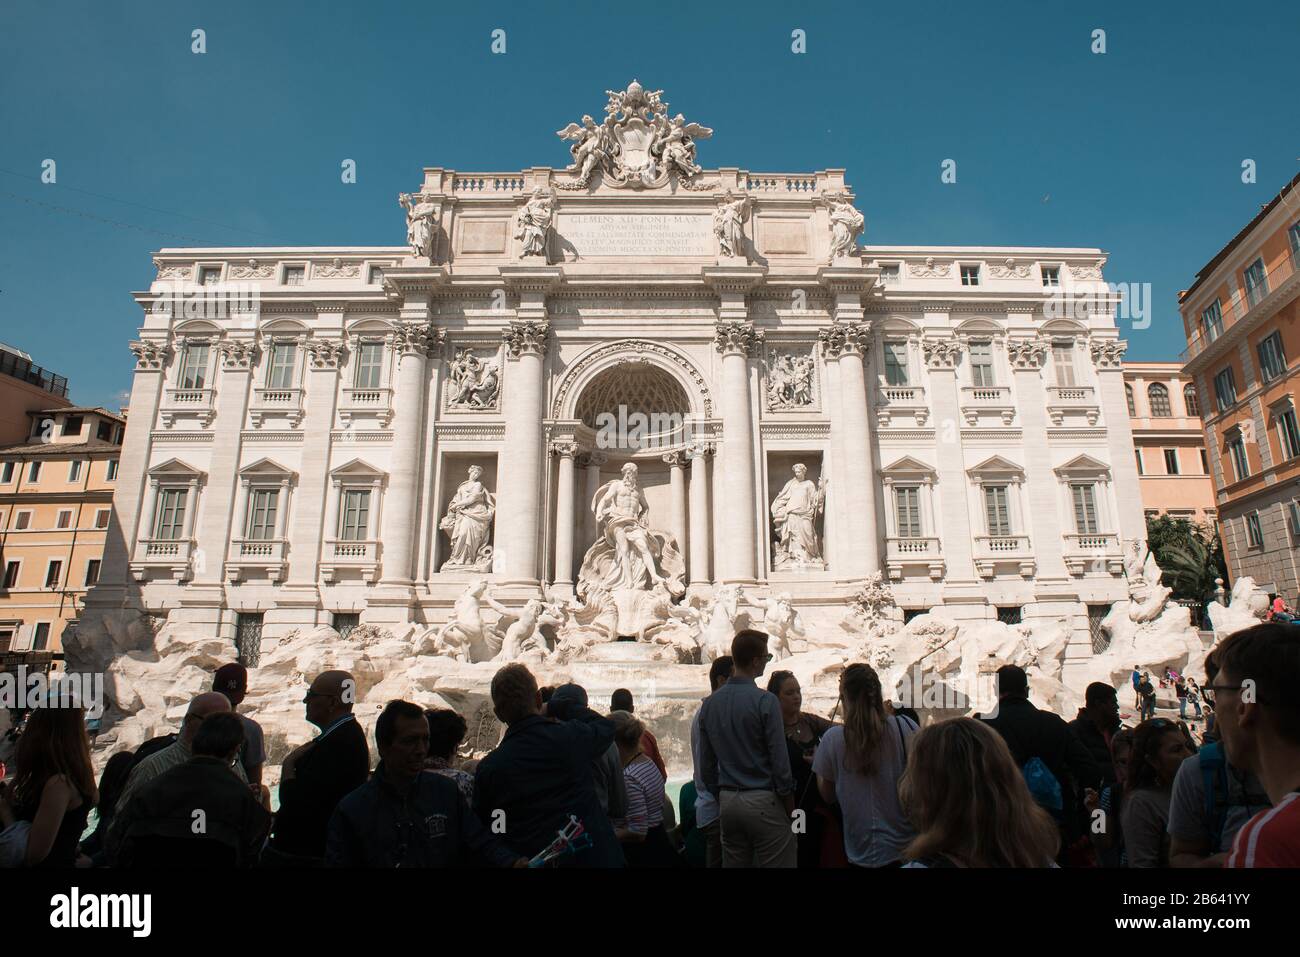 Rome. Italy - March 21, 2017: Silhouettes of Tourists near Famous Trevi Fountain in Rome, Italy. Baroque Architecture and City Landmark. Stock Photo